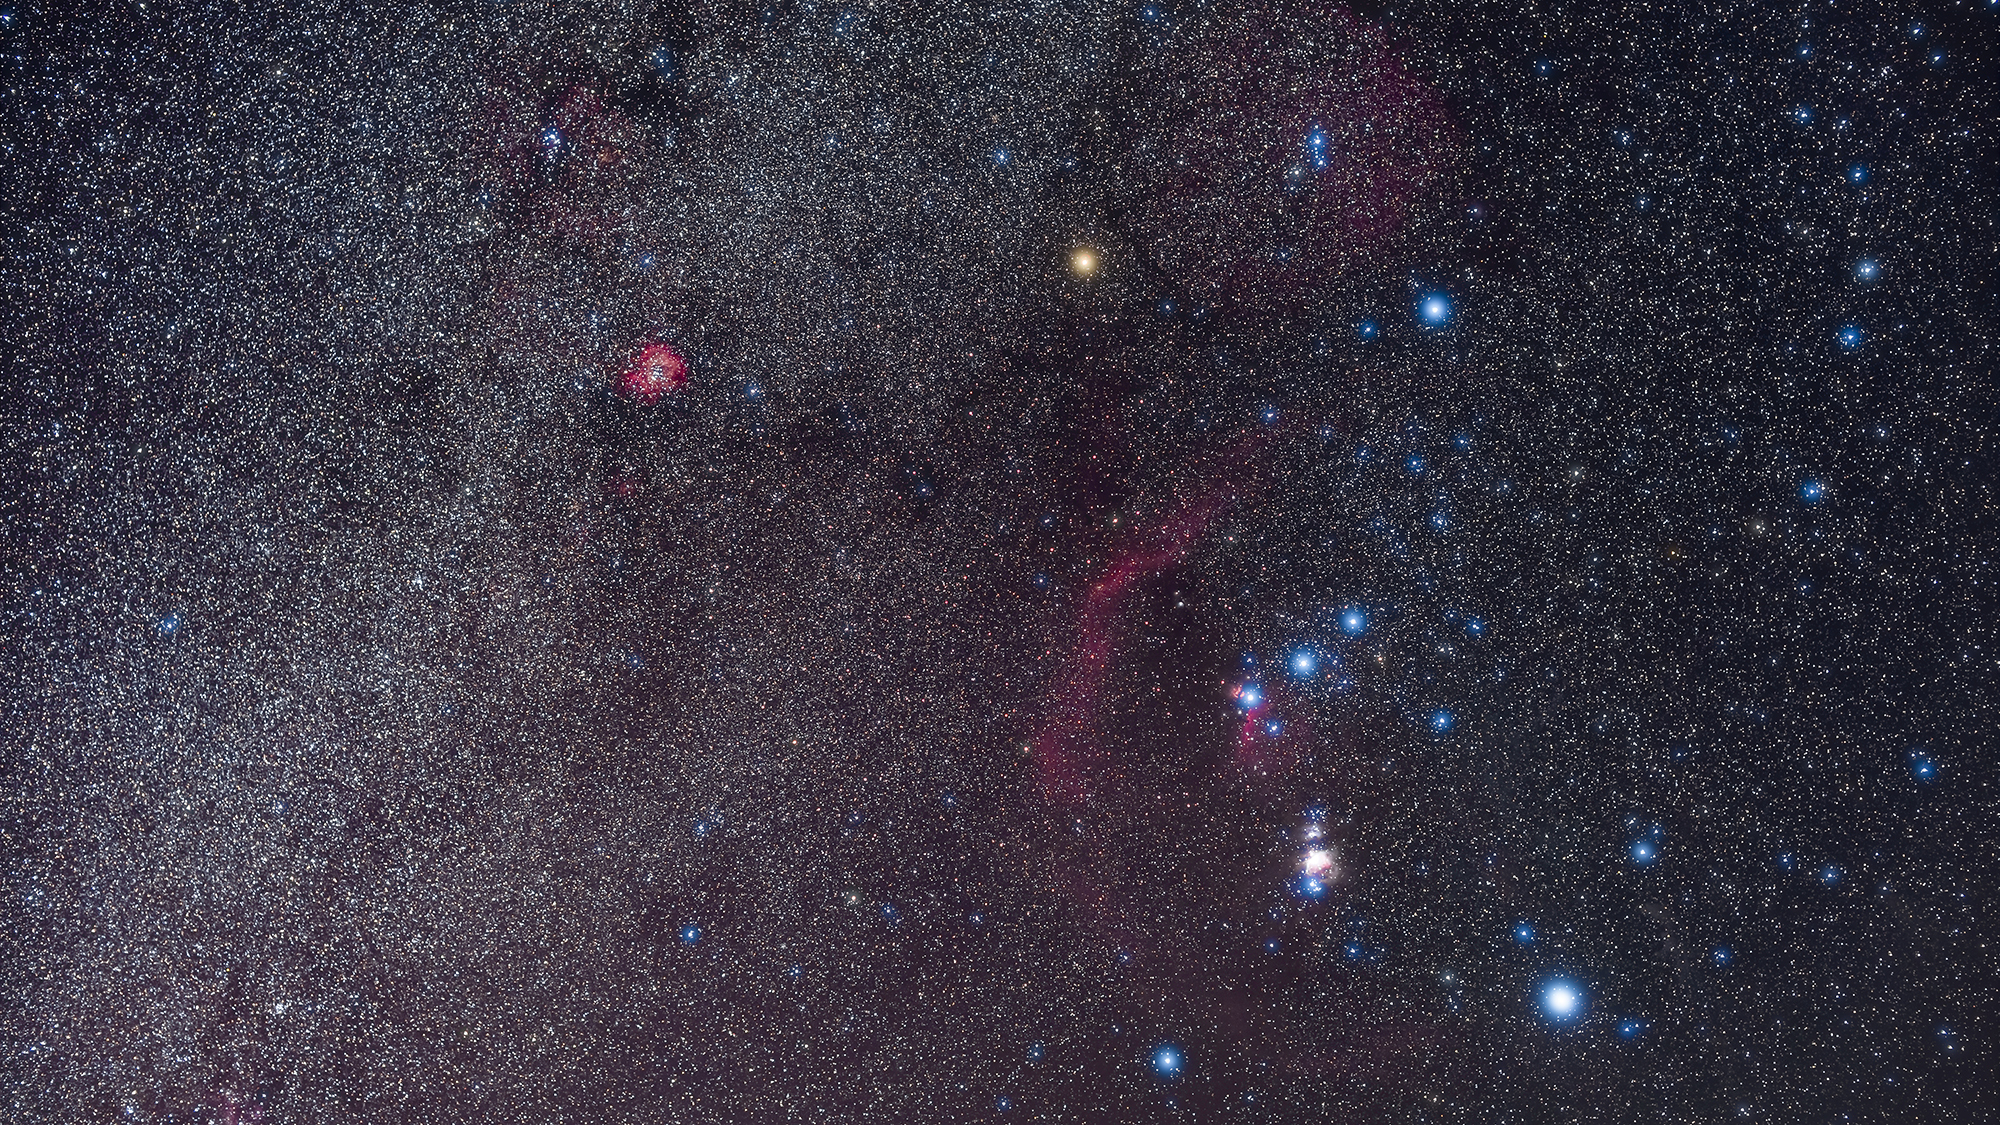 The constellation Orion, the Hunter as seen in the northern winter Milky Way in February 2020. The Orion Nebula is the bright, overexposed pink glow below the Belt of Orion, while the curving arc of red is Barnard’s Loop, now thought to be a supernova remnant. The bright red glow at upper left is the Rosette Nebula. Red Betelgeuse was at its minimum the night this image was taken, at about the same brightness as Bellatrix to the right—Betelgeuse is usually about as bright as blue-white Rigel at the lower right.